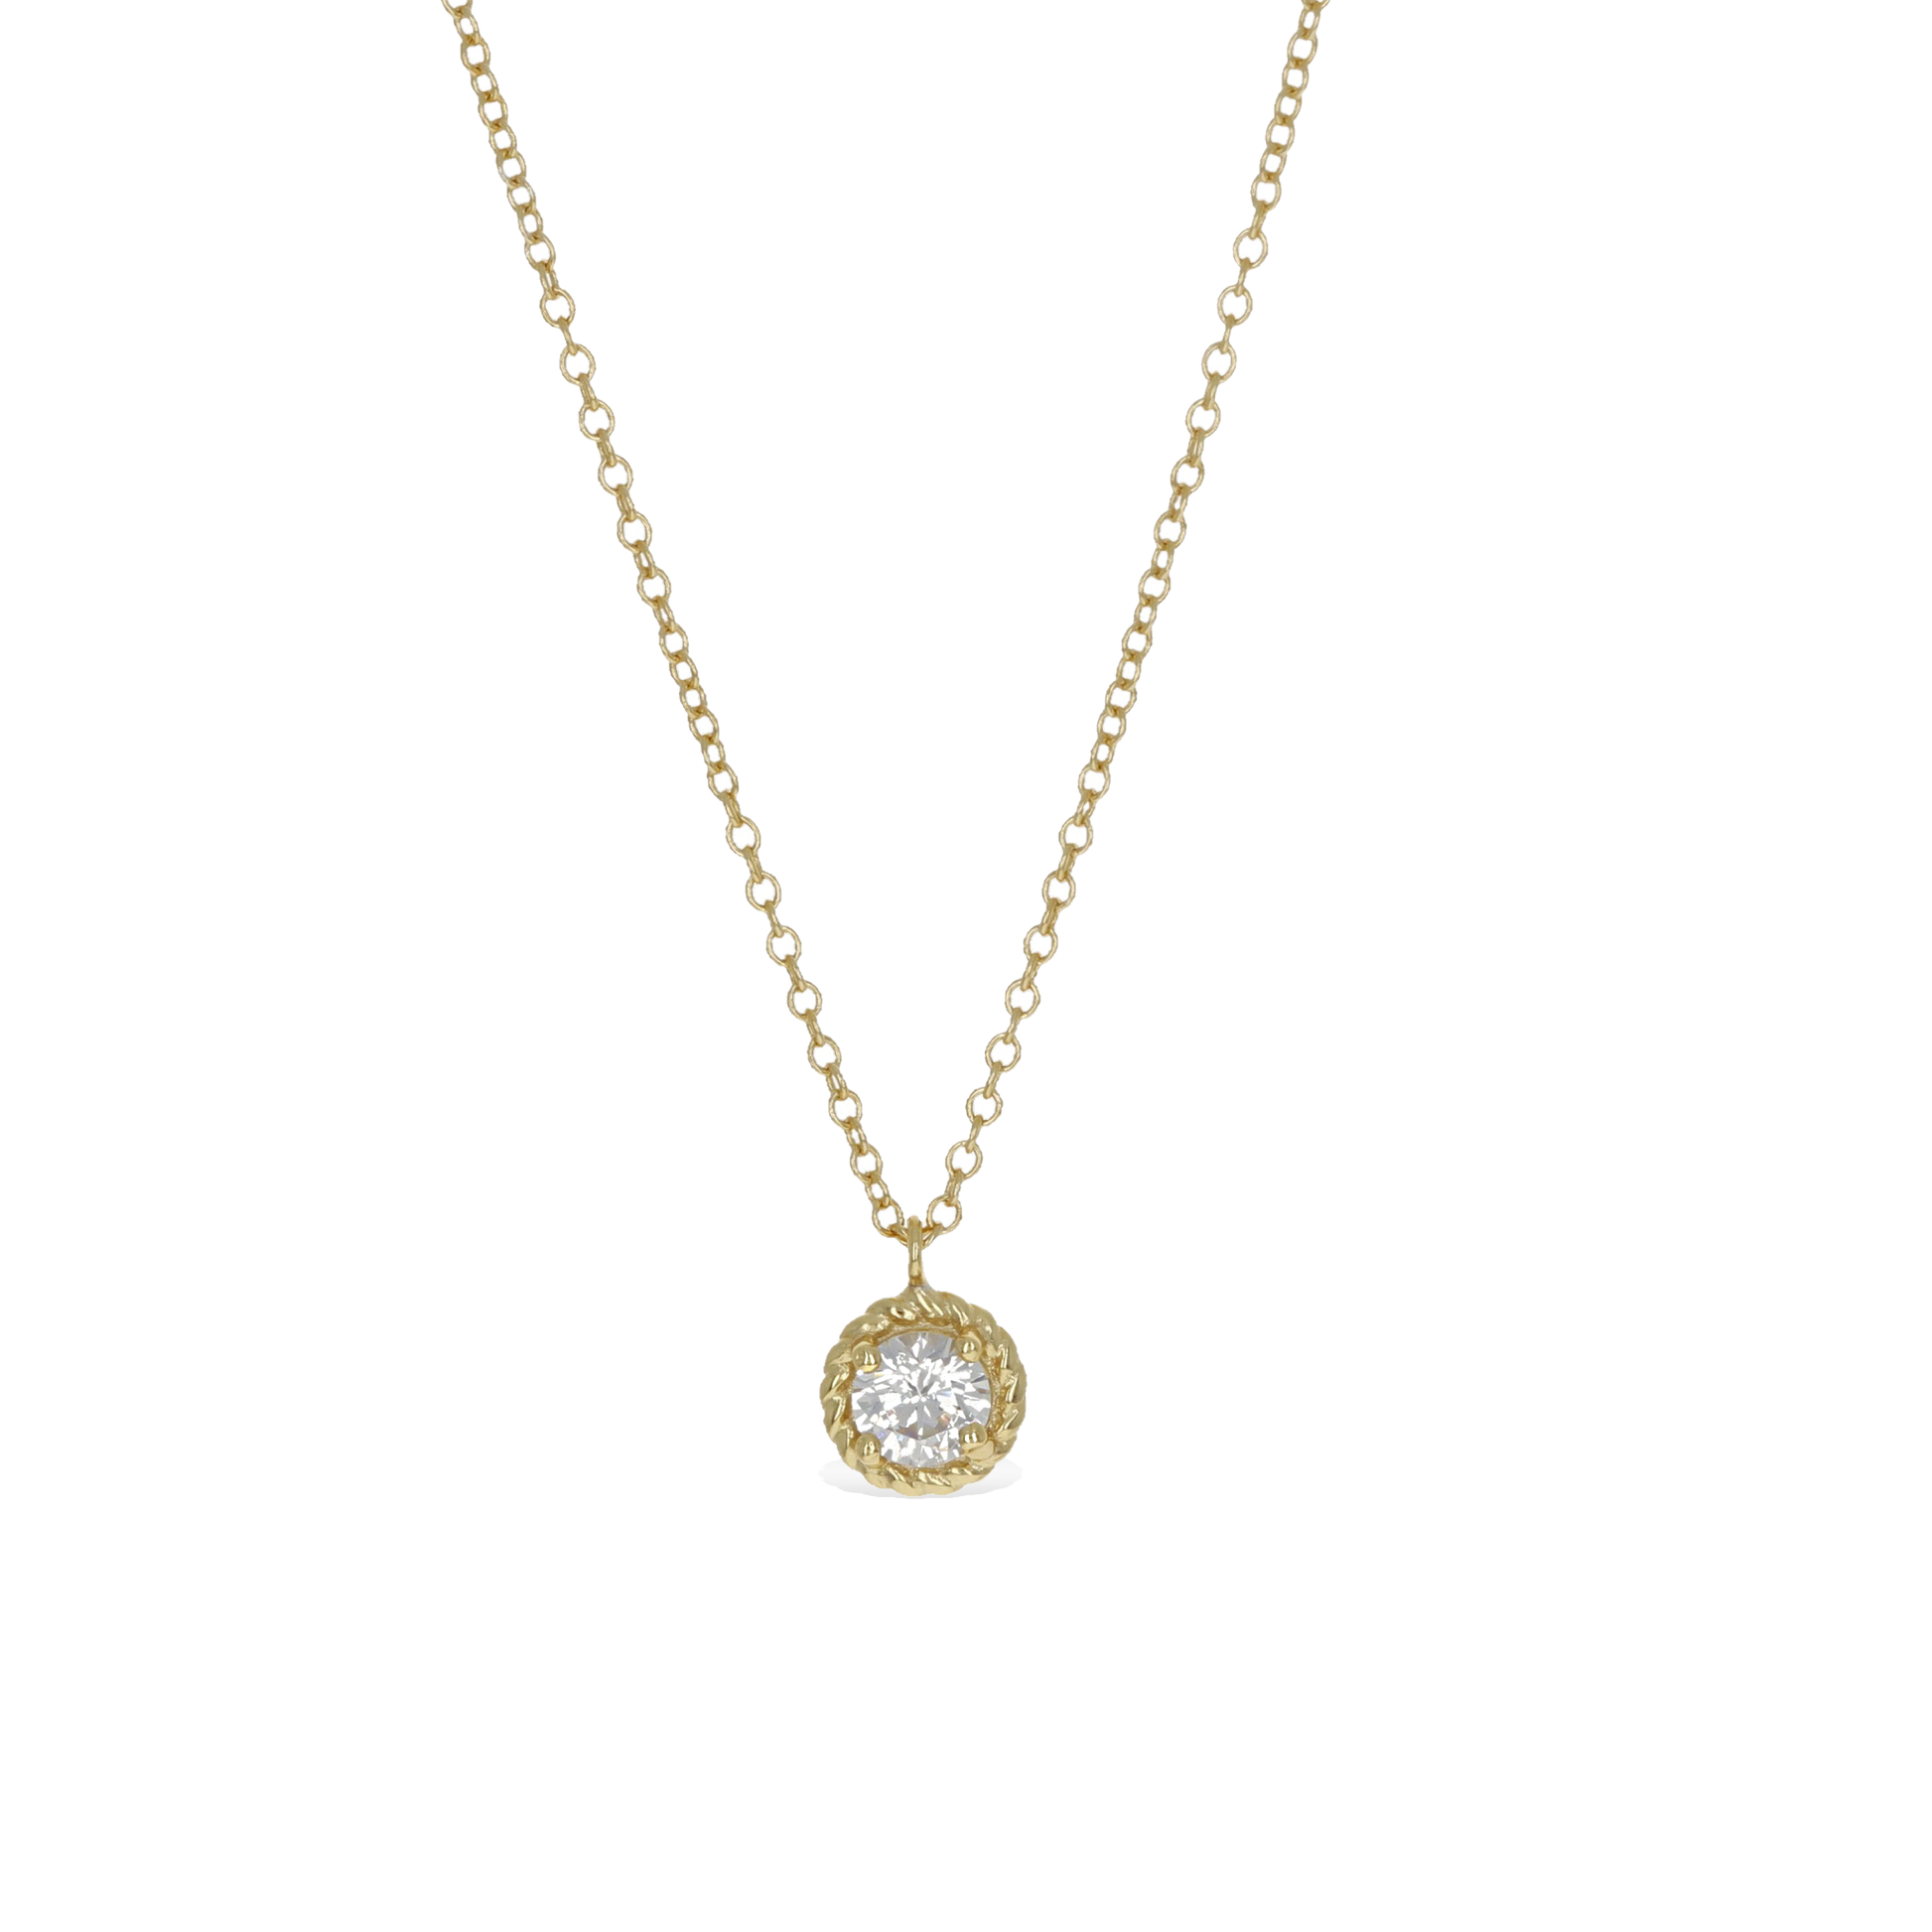 Everyday Dainty Gold Solitaire Pendant Necklace from Alexandra Marks Jewelry